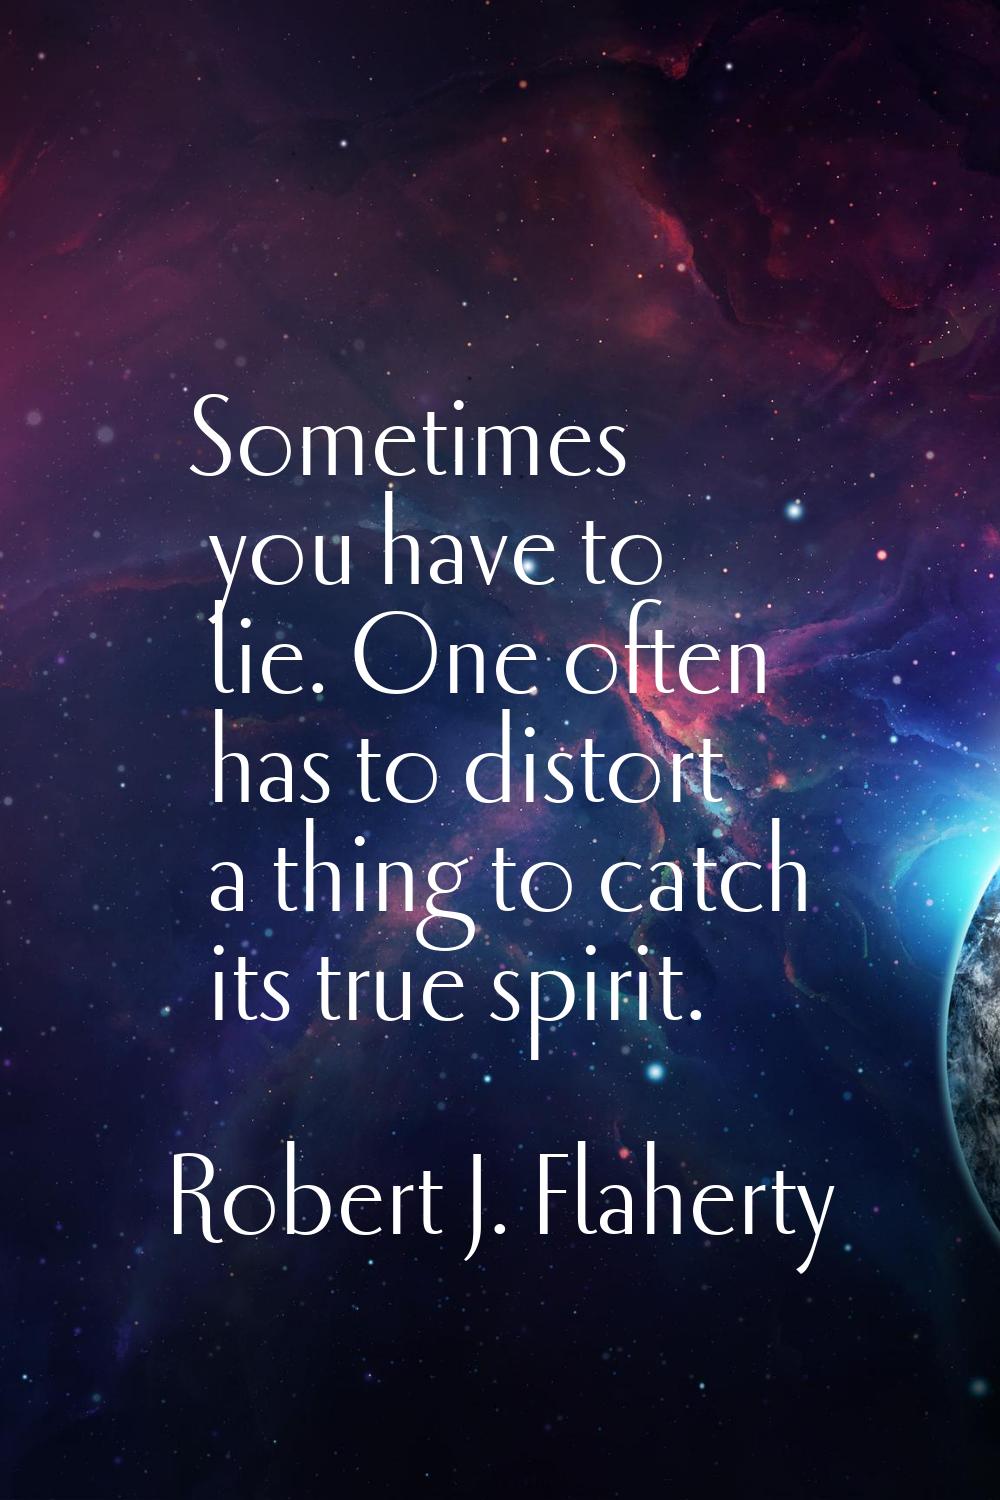 Sometimes you have to lie. One often has to distort a thing to catch its true spirit.